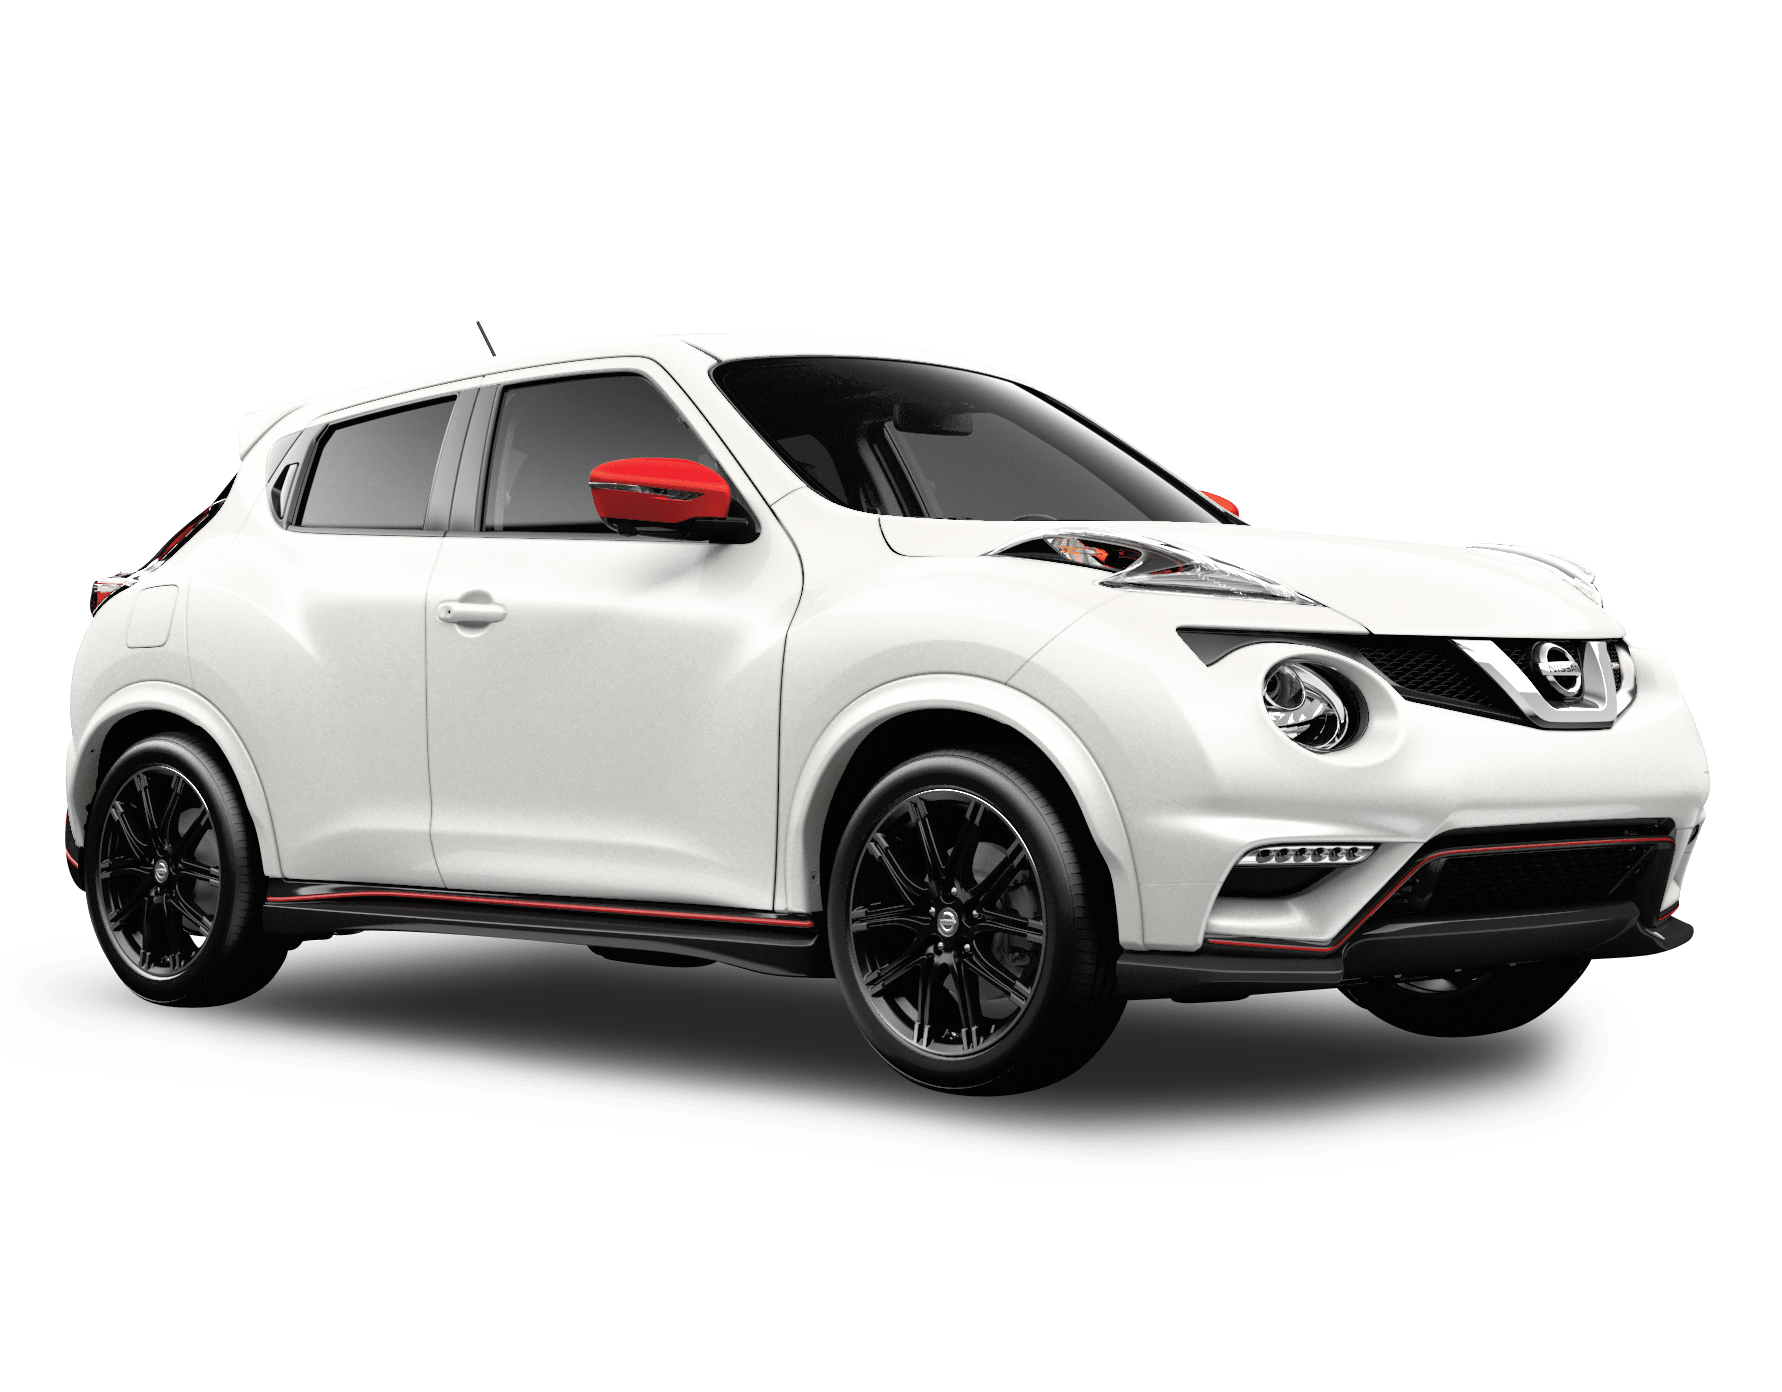 Nissan Juke Review Price For Sale Colours Interior